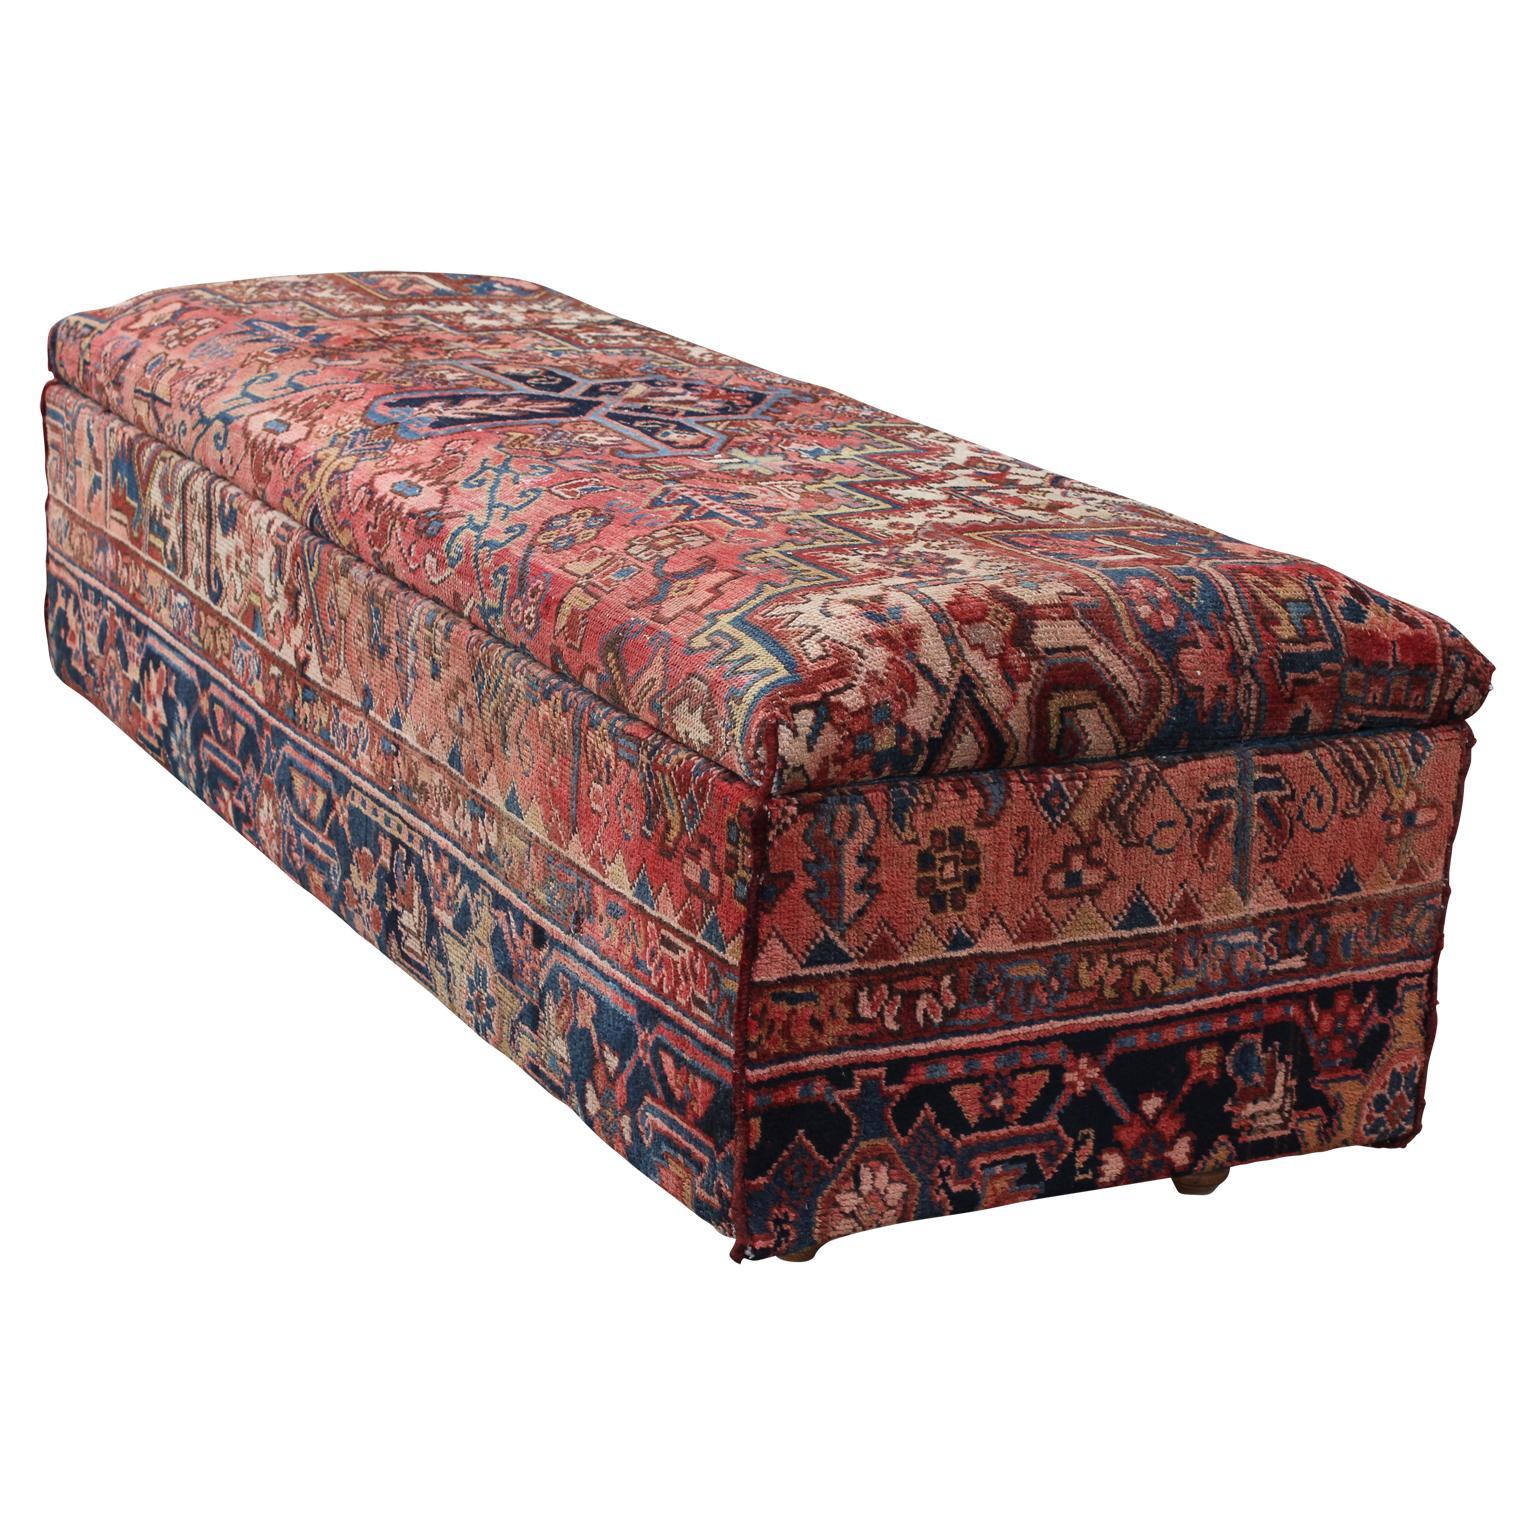 Custom made storage bench upholstered using two different Persian fabrics similar to the Persian Bakshaish rugs. The outside of the bench is a red decorative print and the inside is blue fabric. The piece has wooden feet and sits low to the floor.